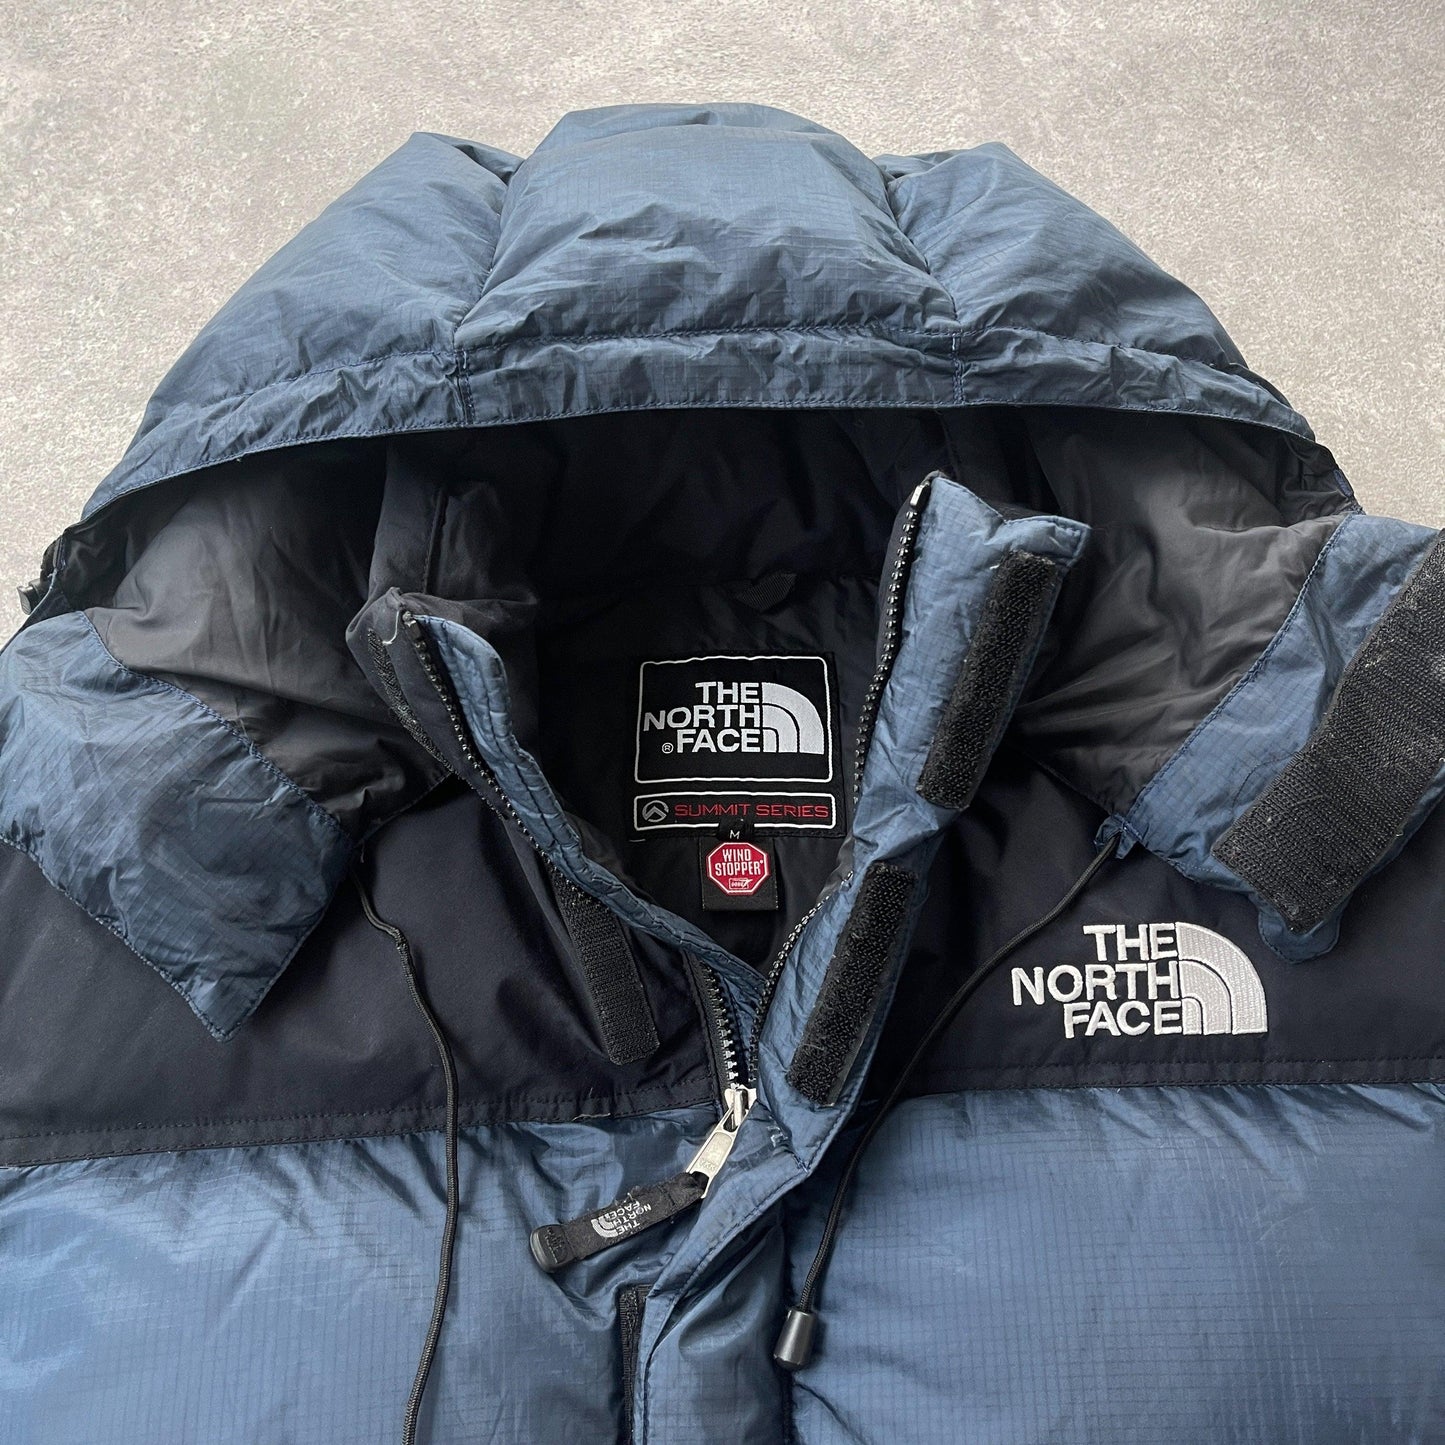 The North Face Baltoro 700 down fill windstopper puffer jacket (M) - Known Source